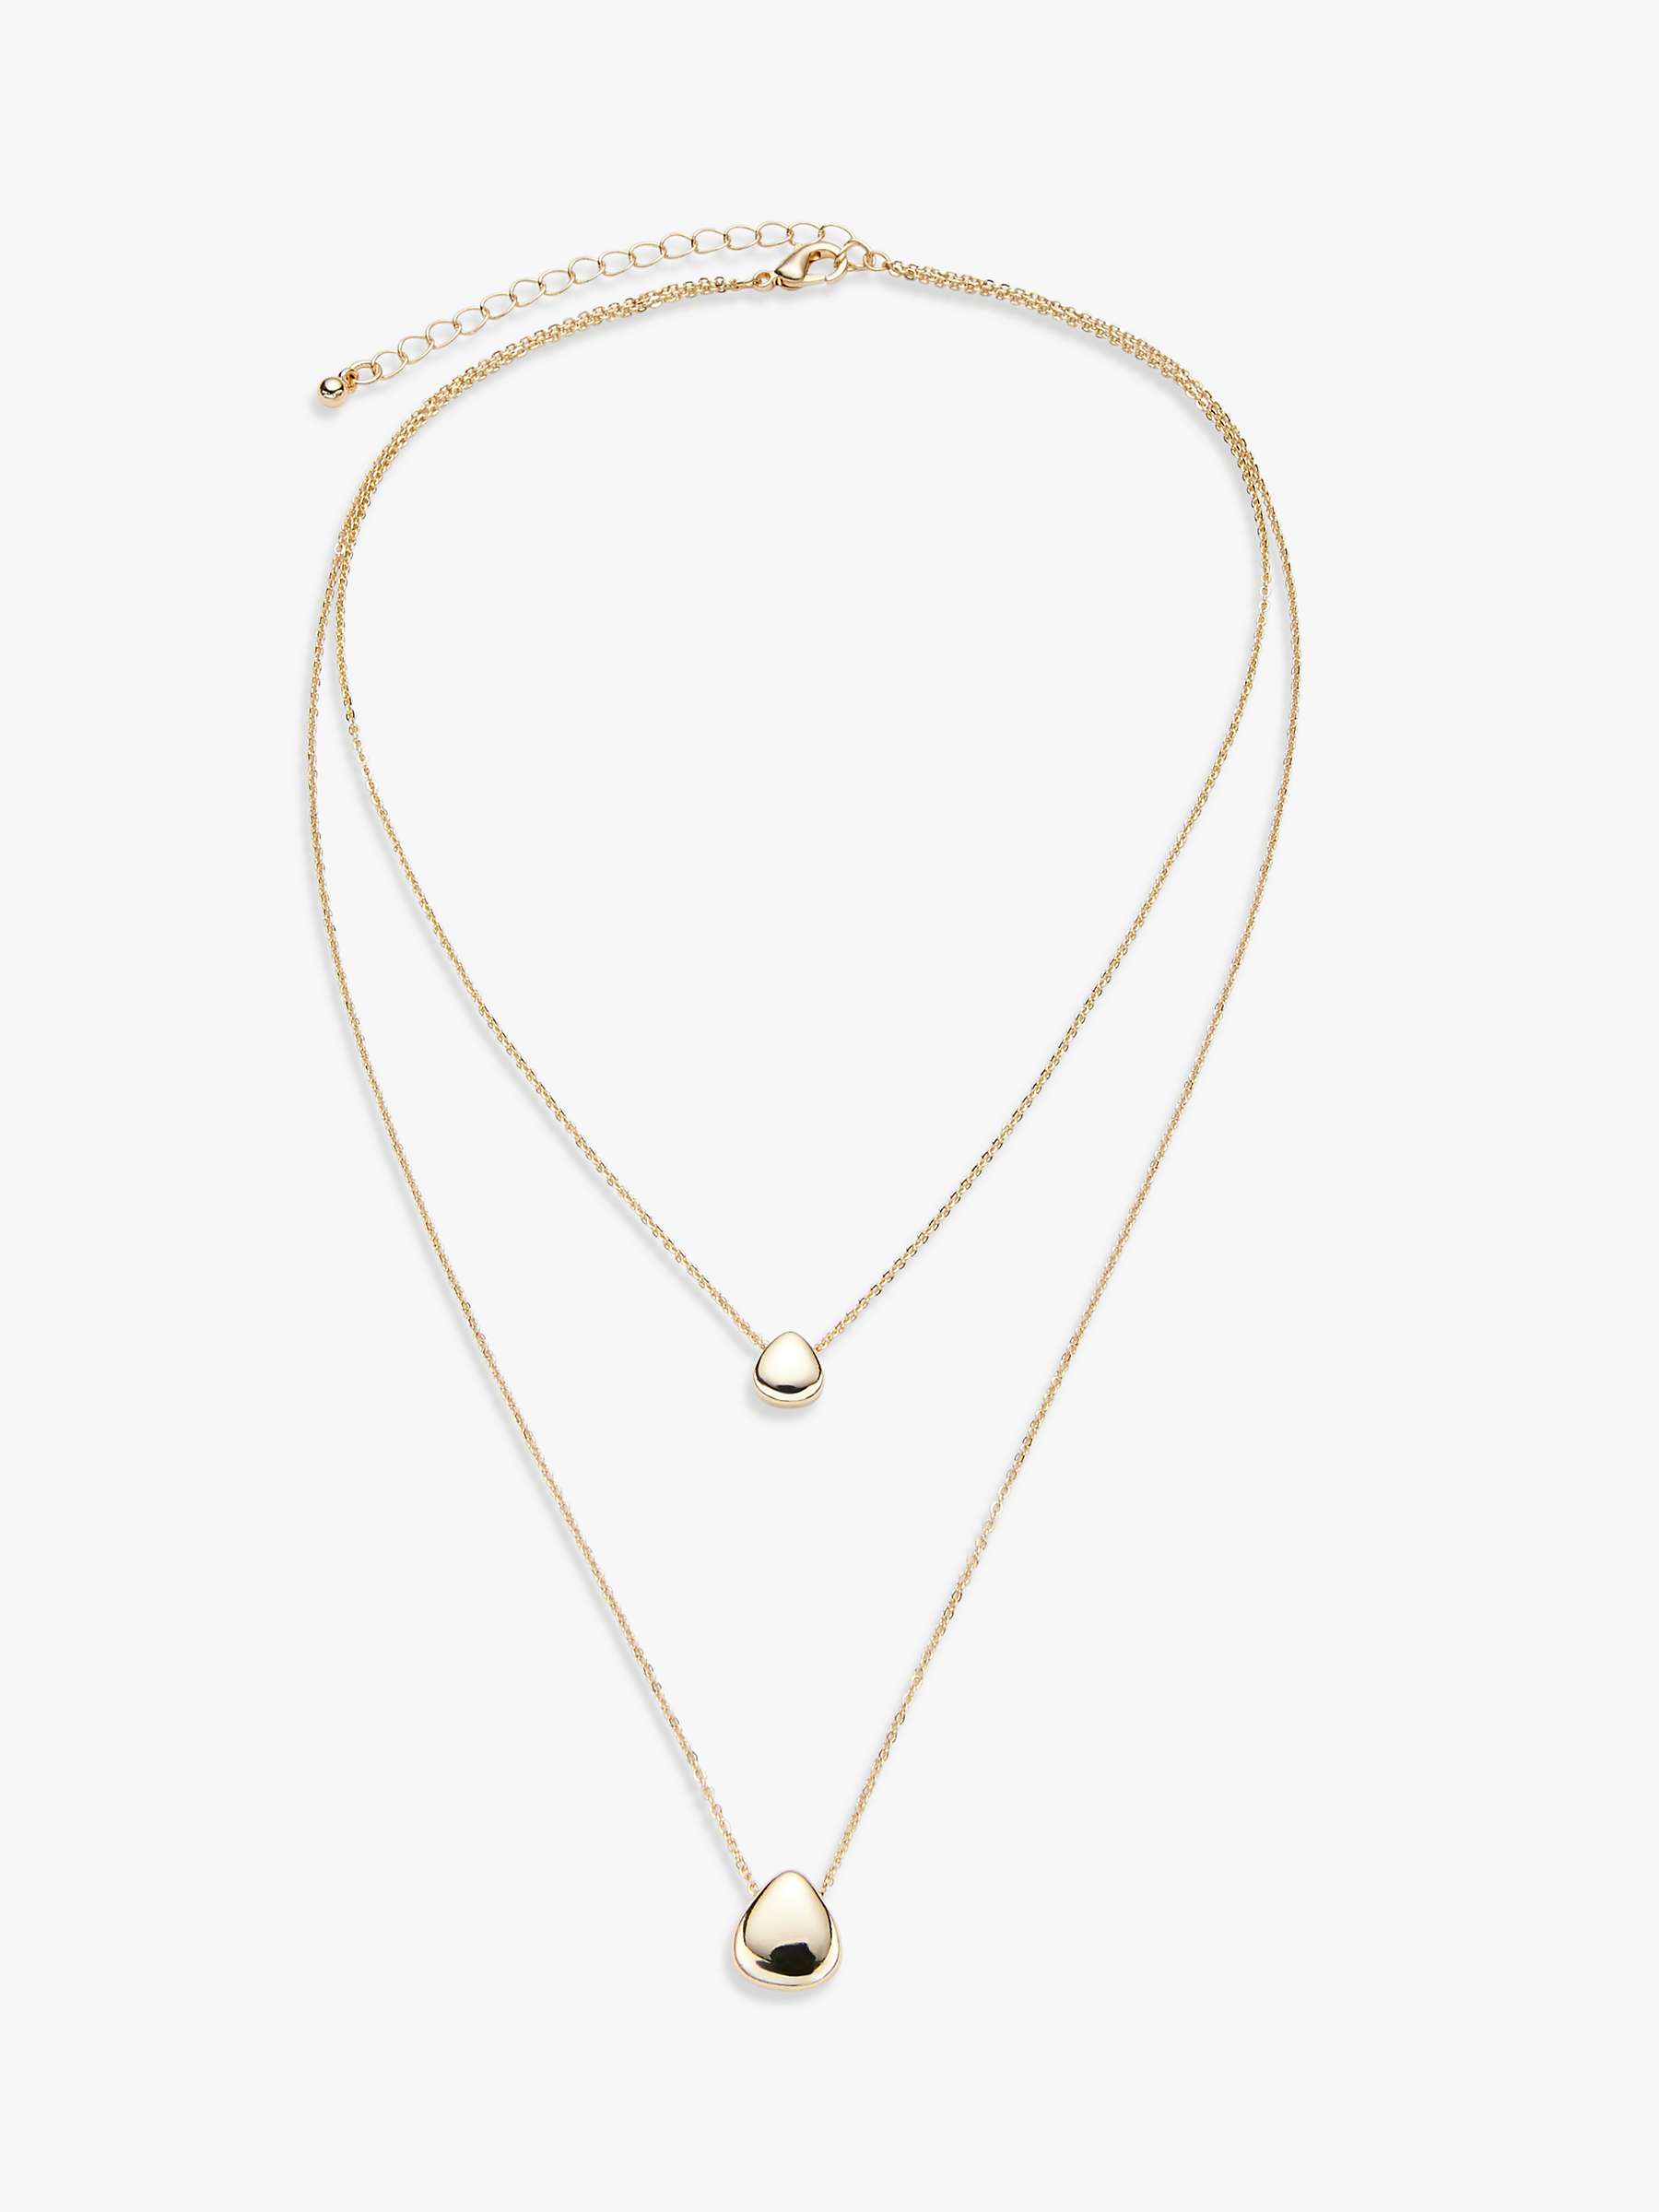 Buy John Lewis Two Row Mini Droplet Layered Necklace Online at johnlewis.com